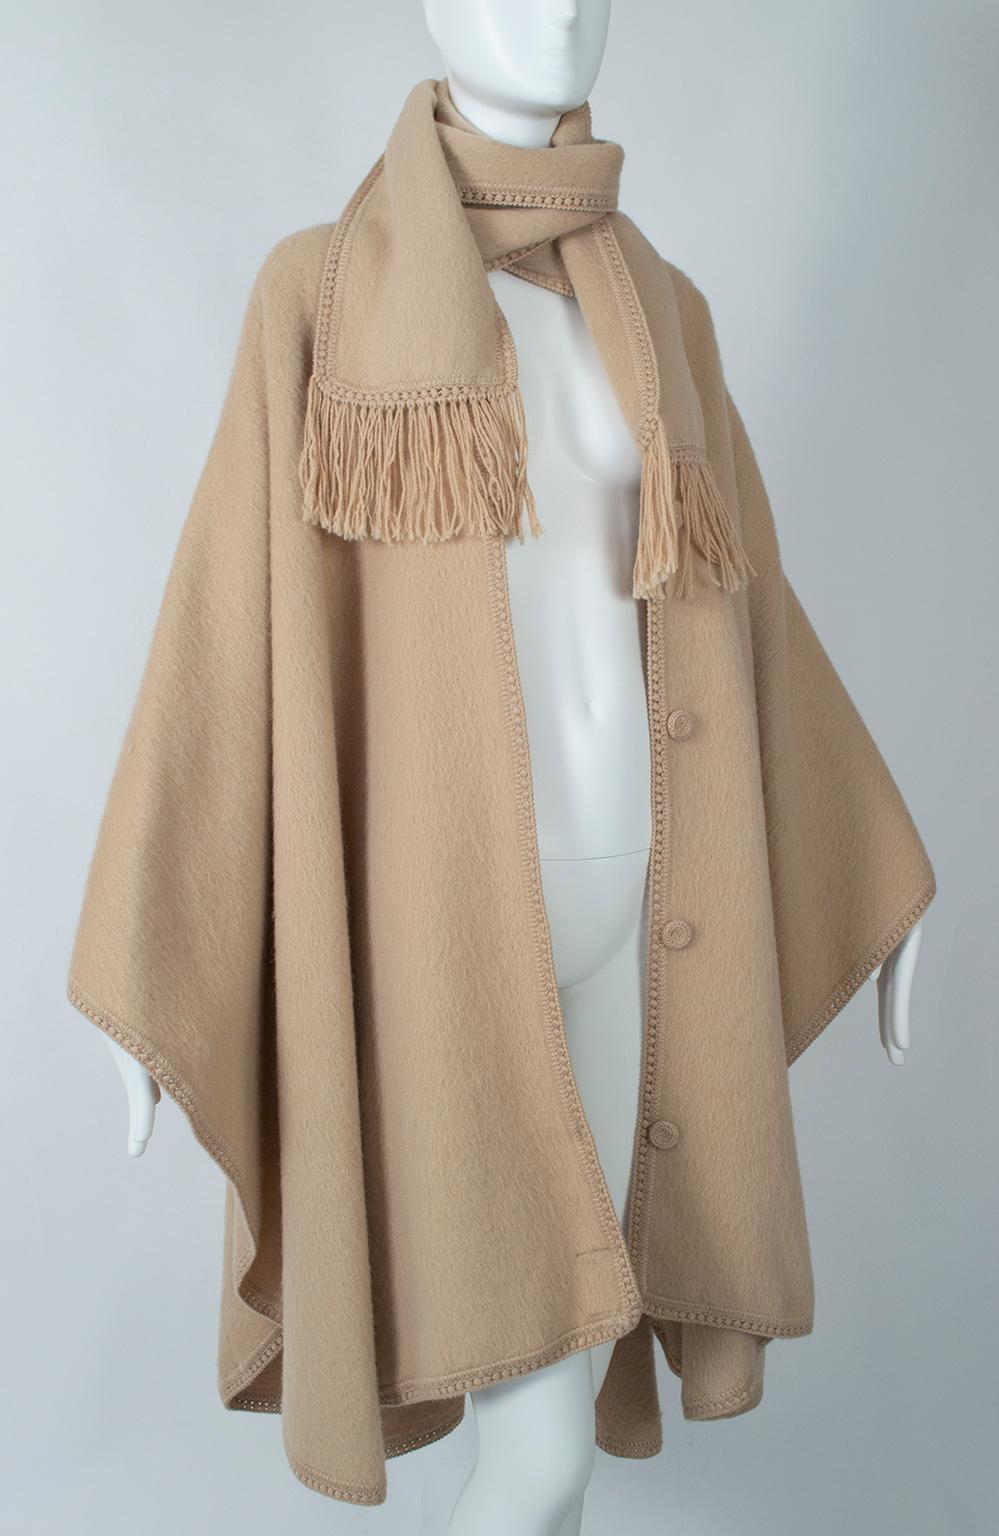 Brown Camel Peruvian Alpaca Poncho with Attached Scarf, Jacome Estate - One Size, 1960